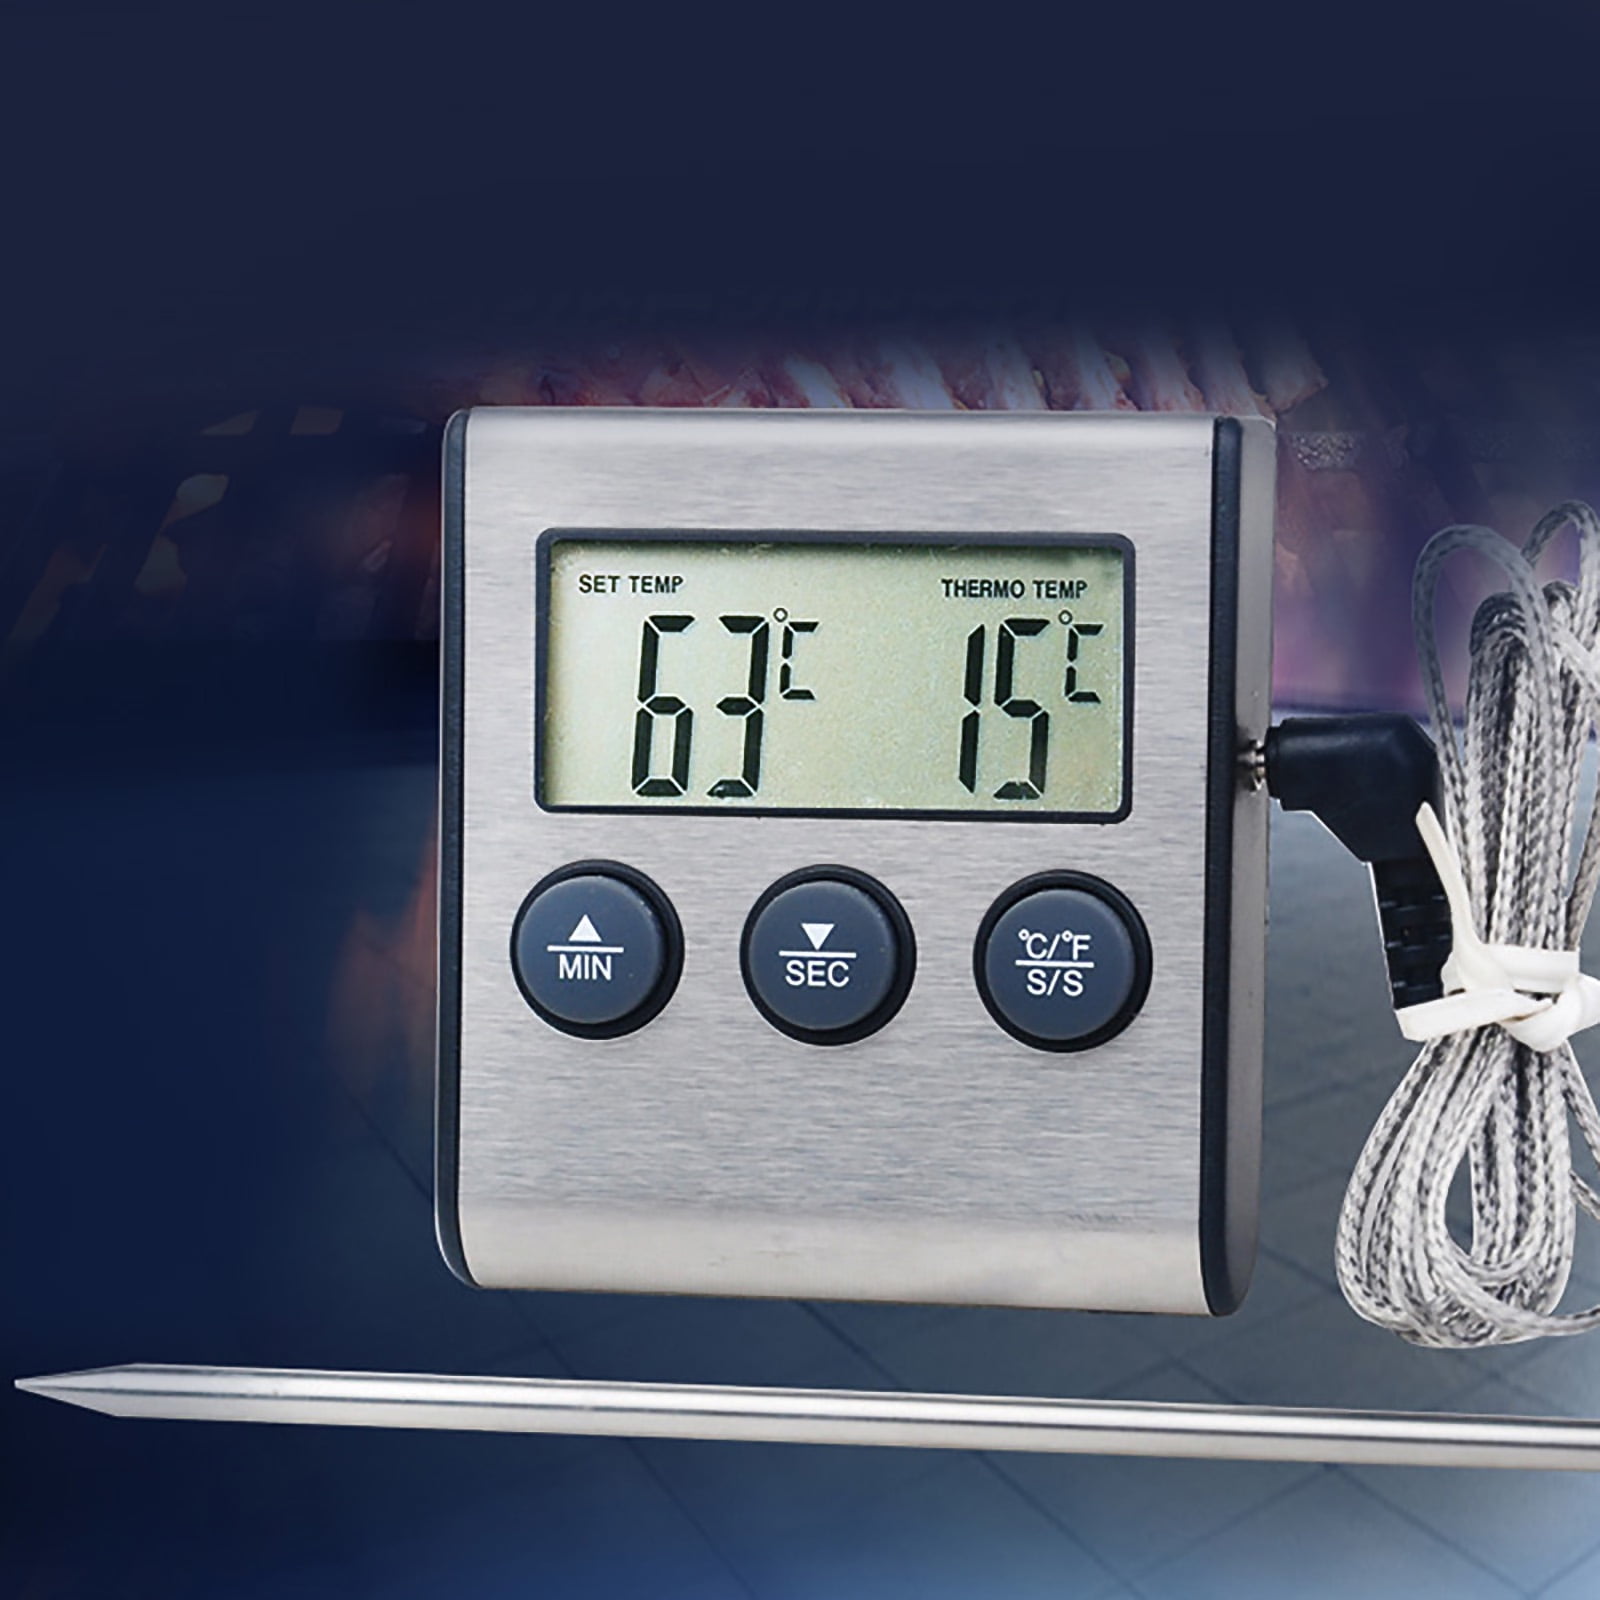 Probe Oven & Meat Thermometer Timer for Meat Food Cooking - Walmart.com